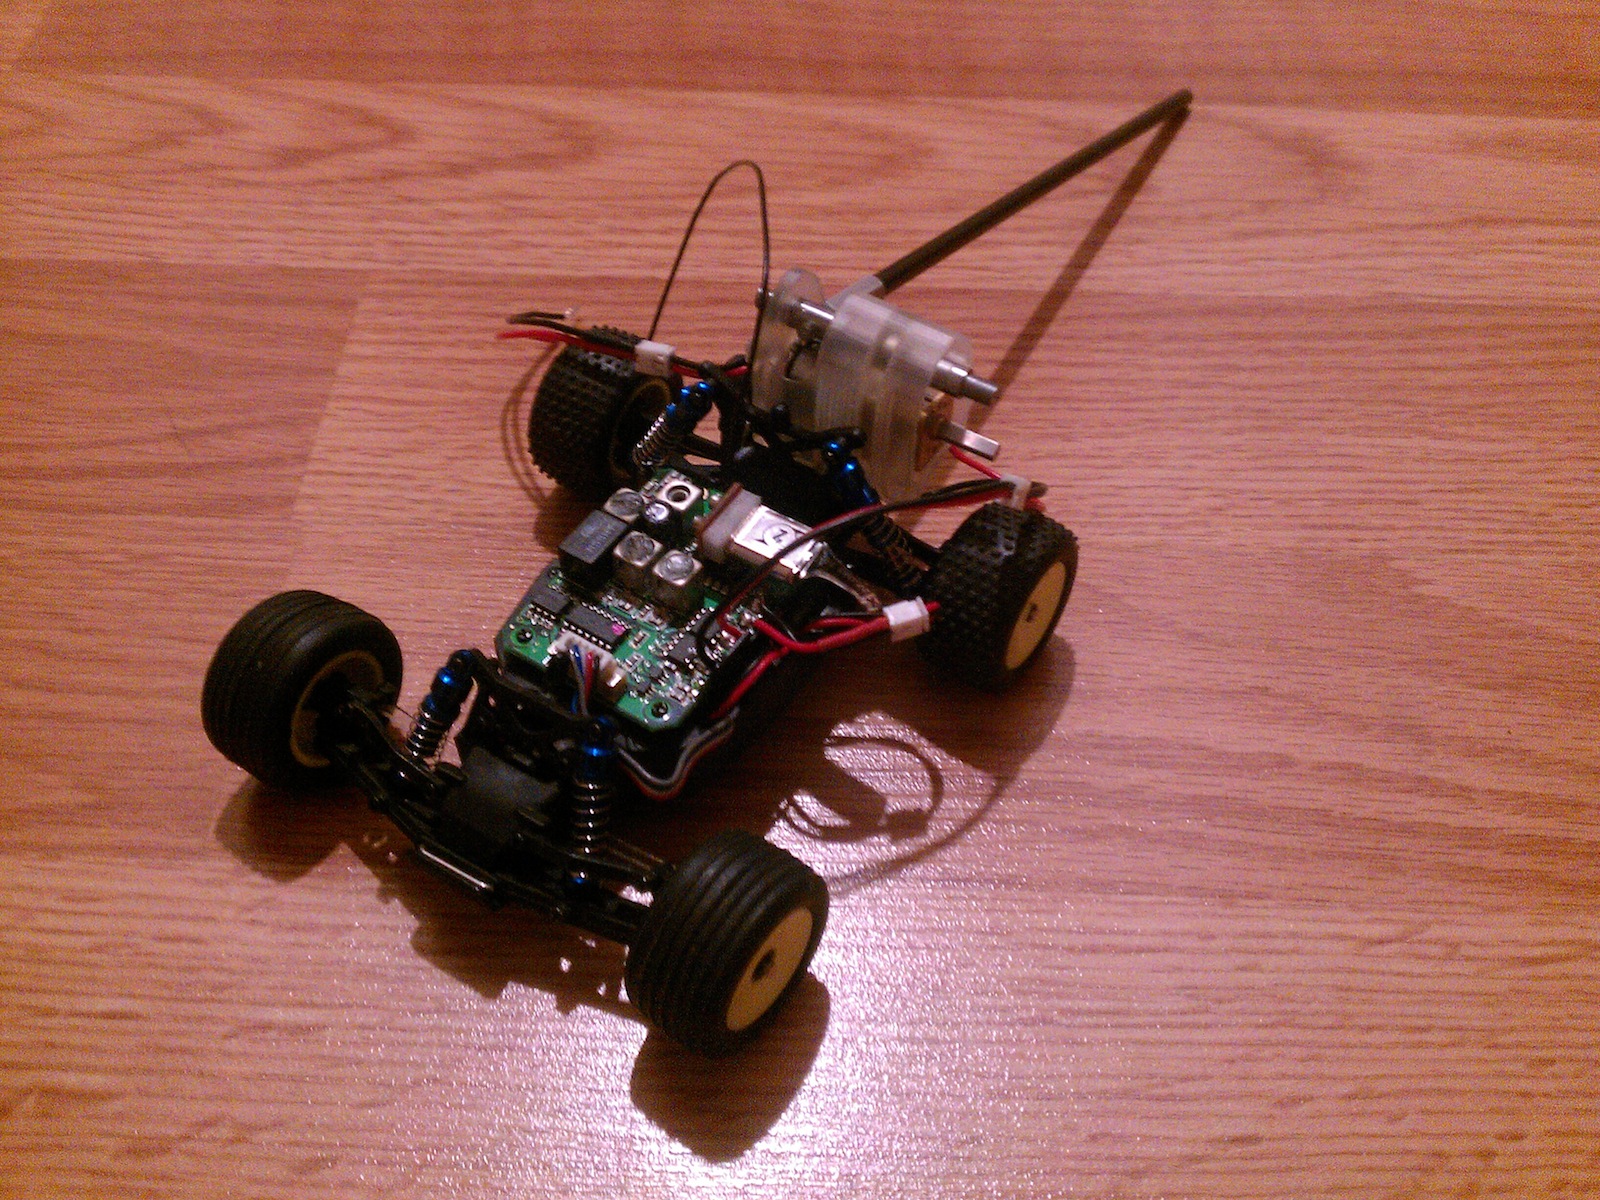 Tailbot v2 with mobile chassis